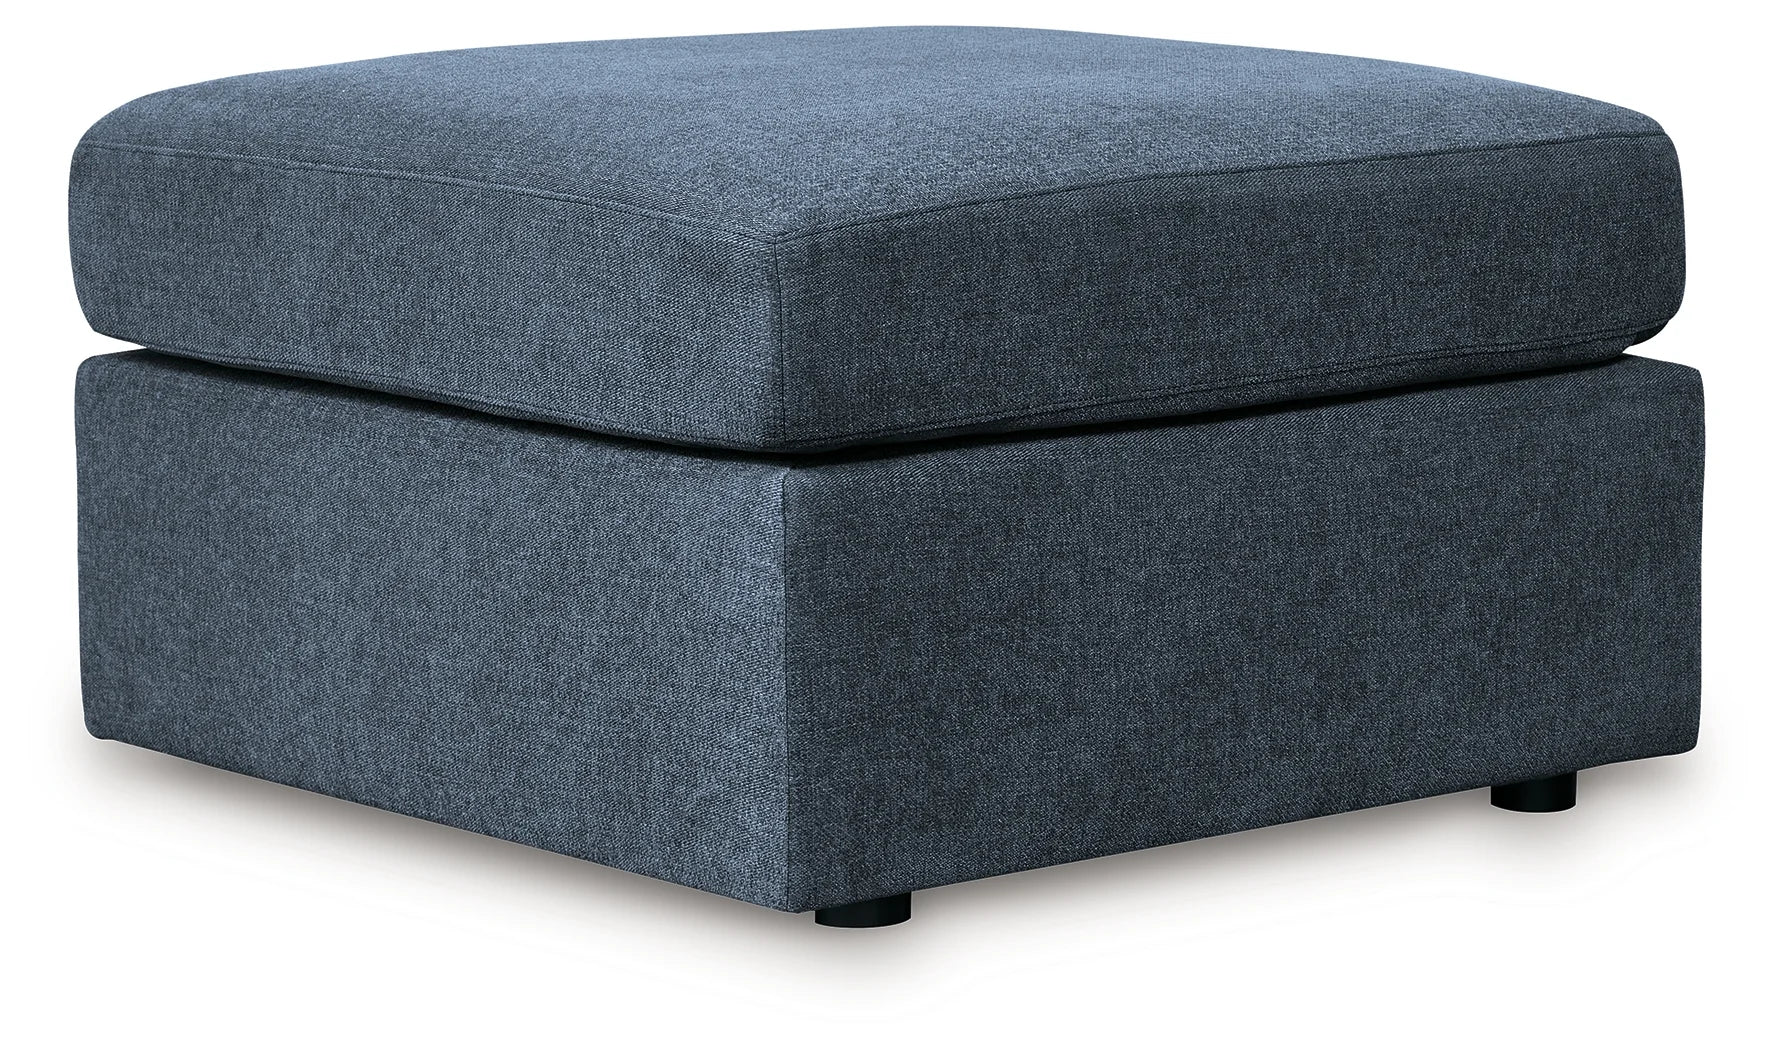 Modmax - Ink - Oversized Accent Ottoman